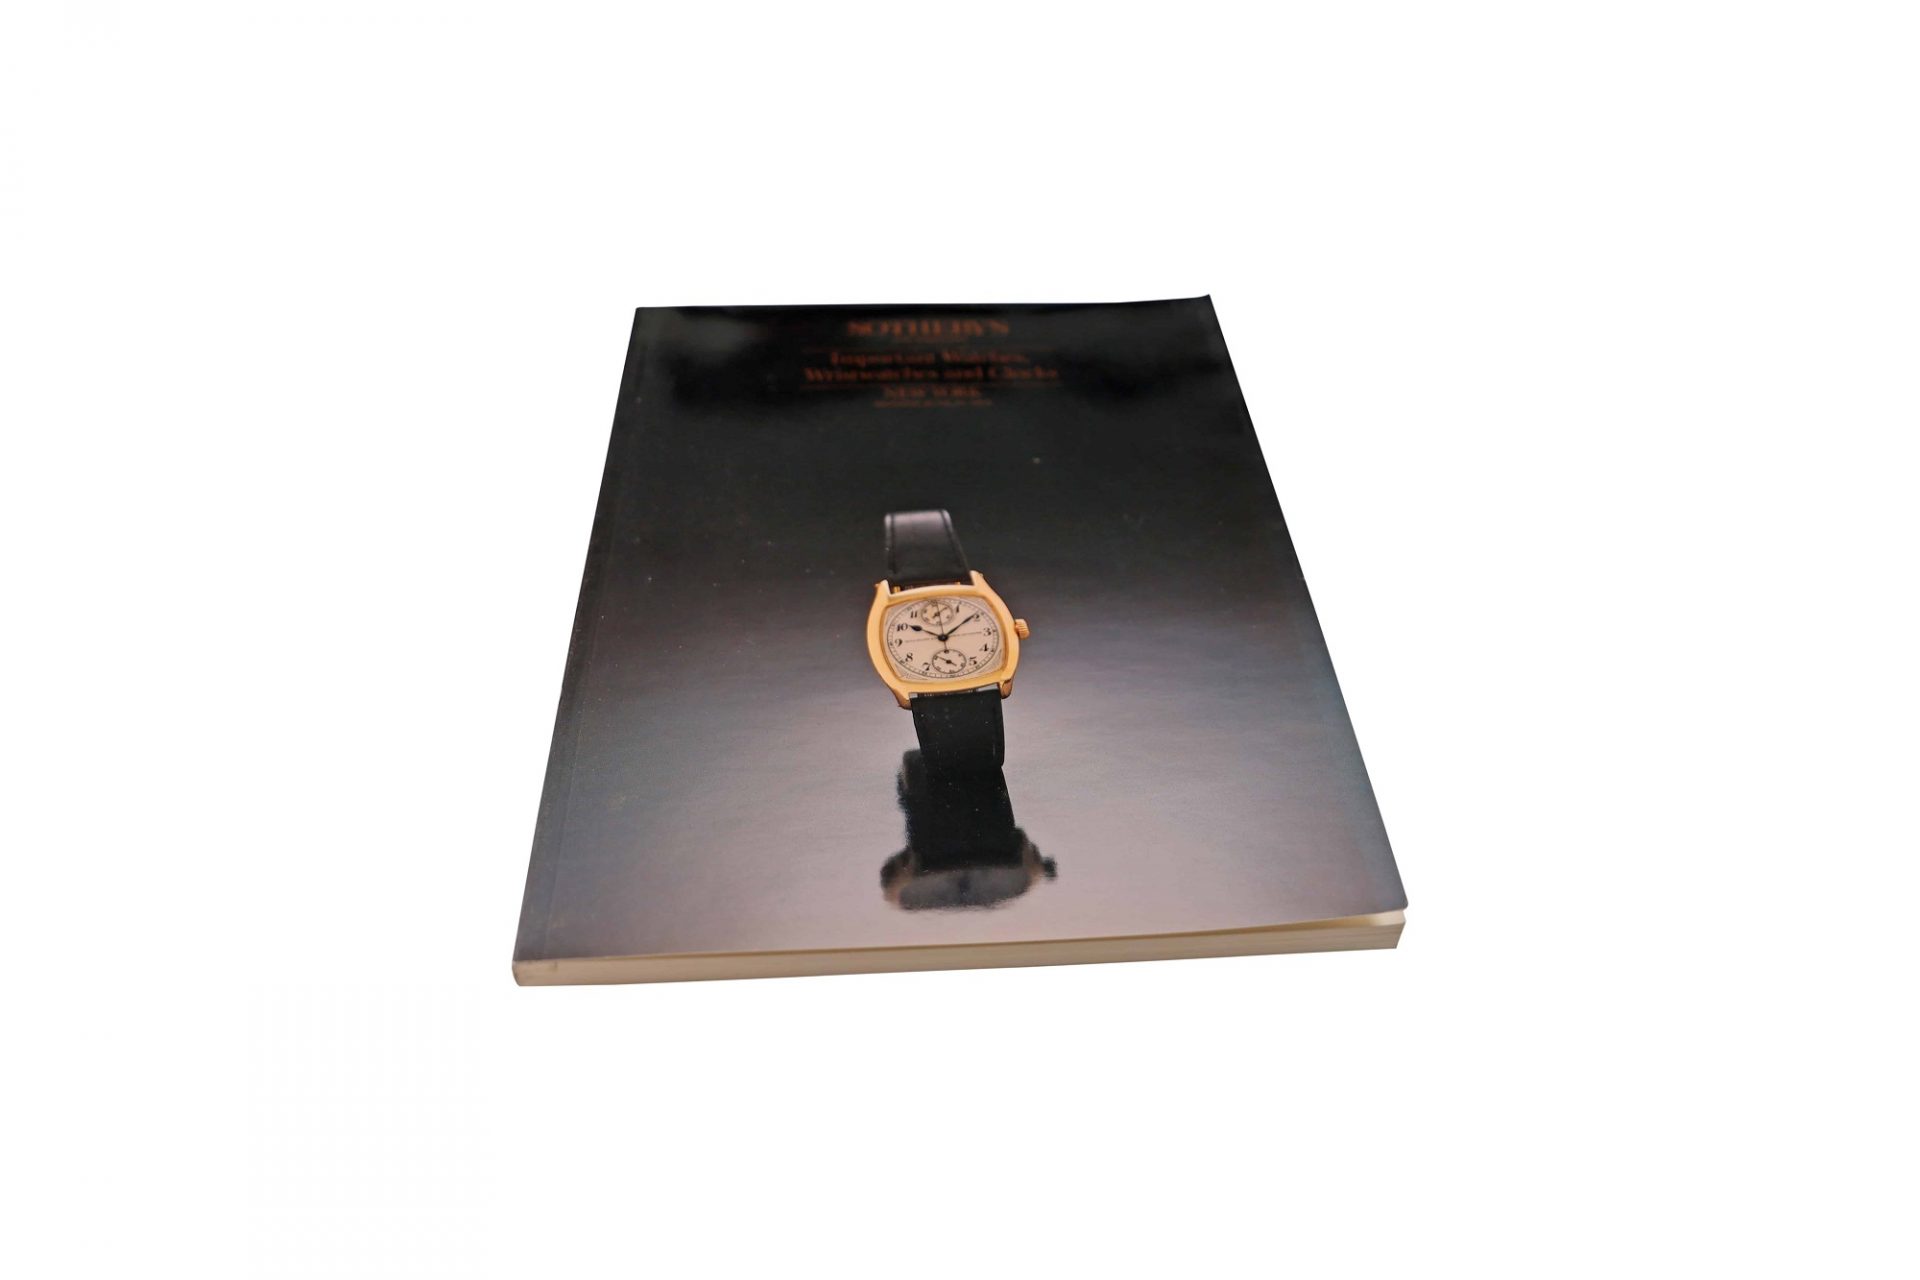 Sotheby's Important Watches, Wristwatches And Clocks New York Auction Catalog - Rare Watch Parts